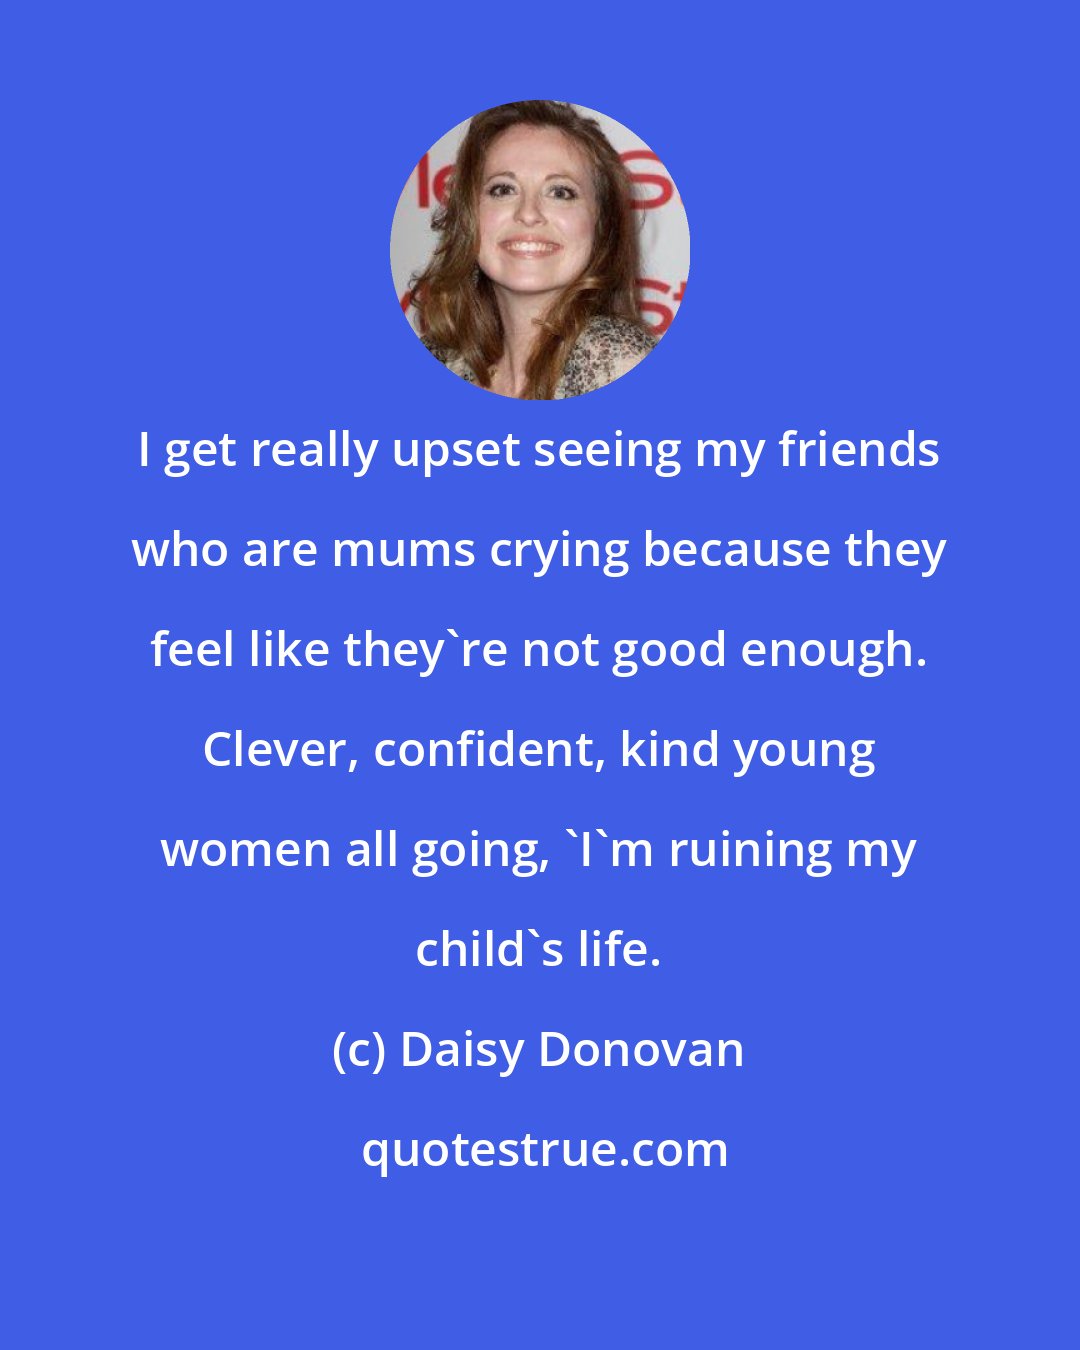 Daisy Donovan: I get really upset seeing my friends who are mums crying because they feel like they're not good enough. Clever, confident, kind young women all going, 'I'm ruining my child's life.